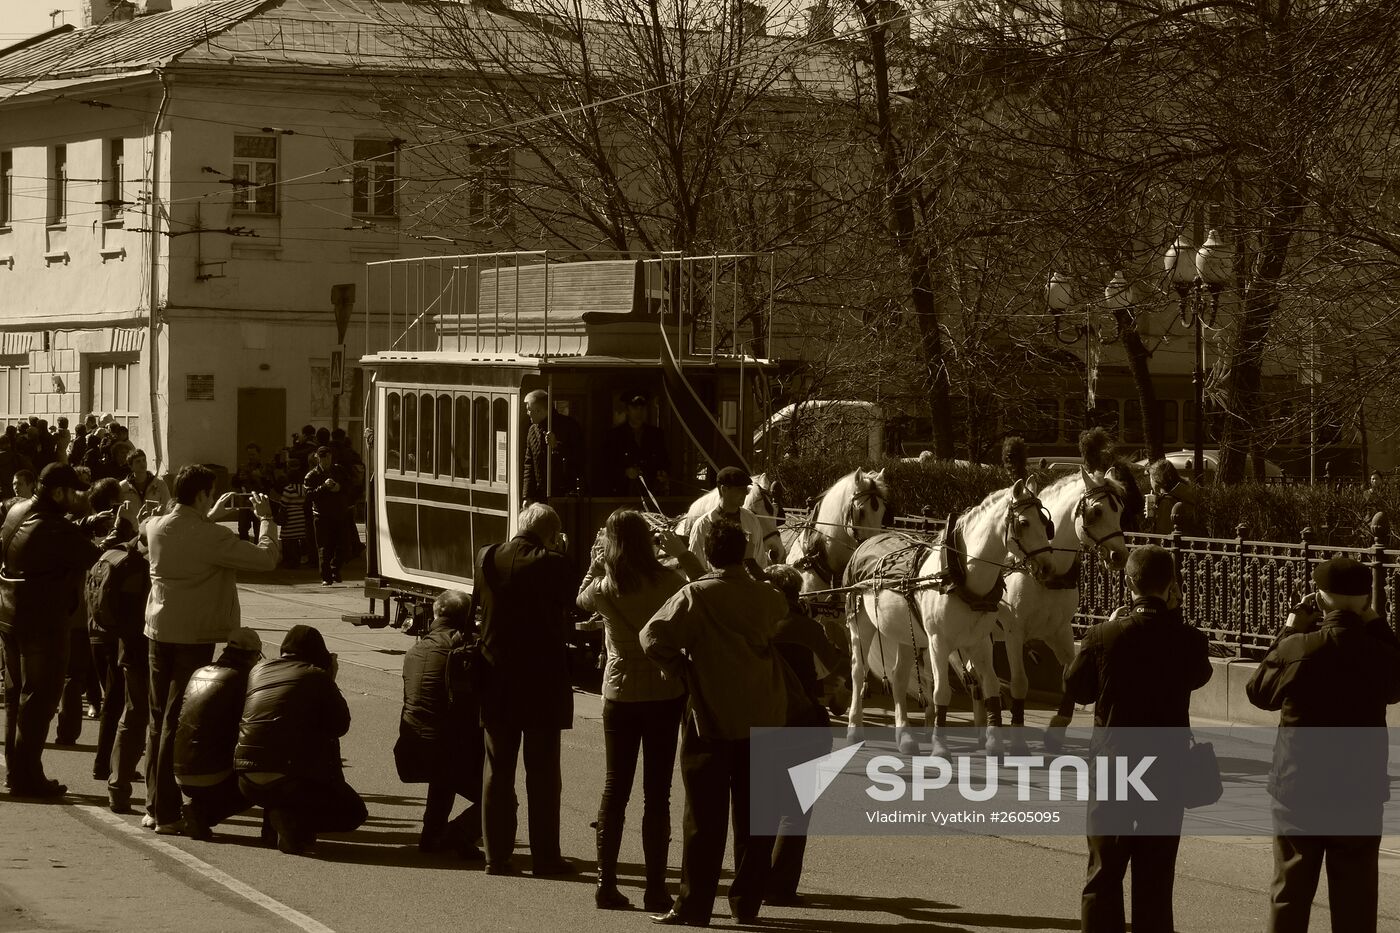 Tram parade "116 Years to Moscow Trams"